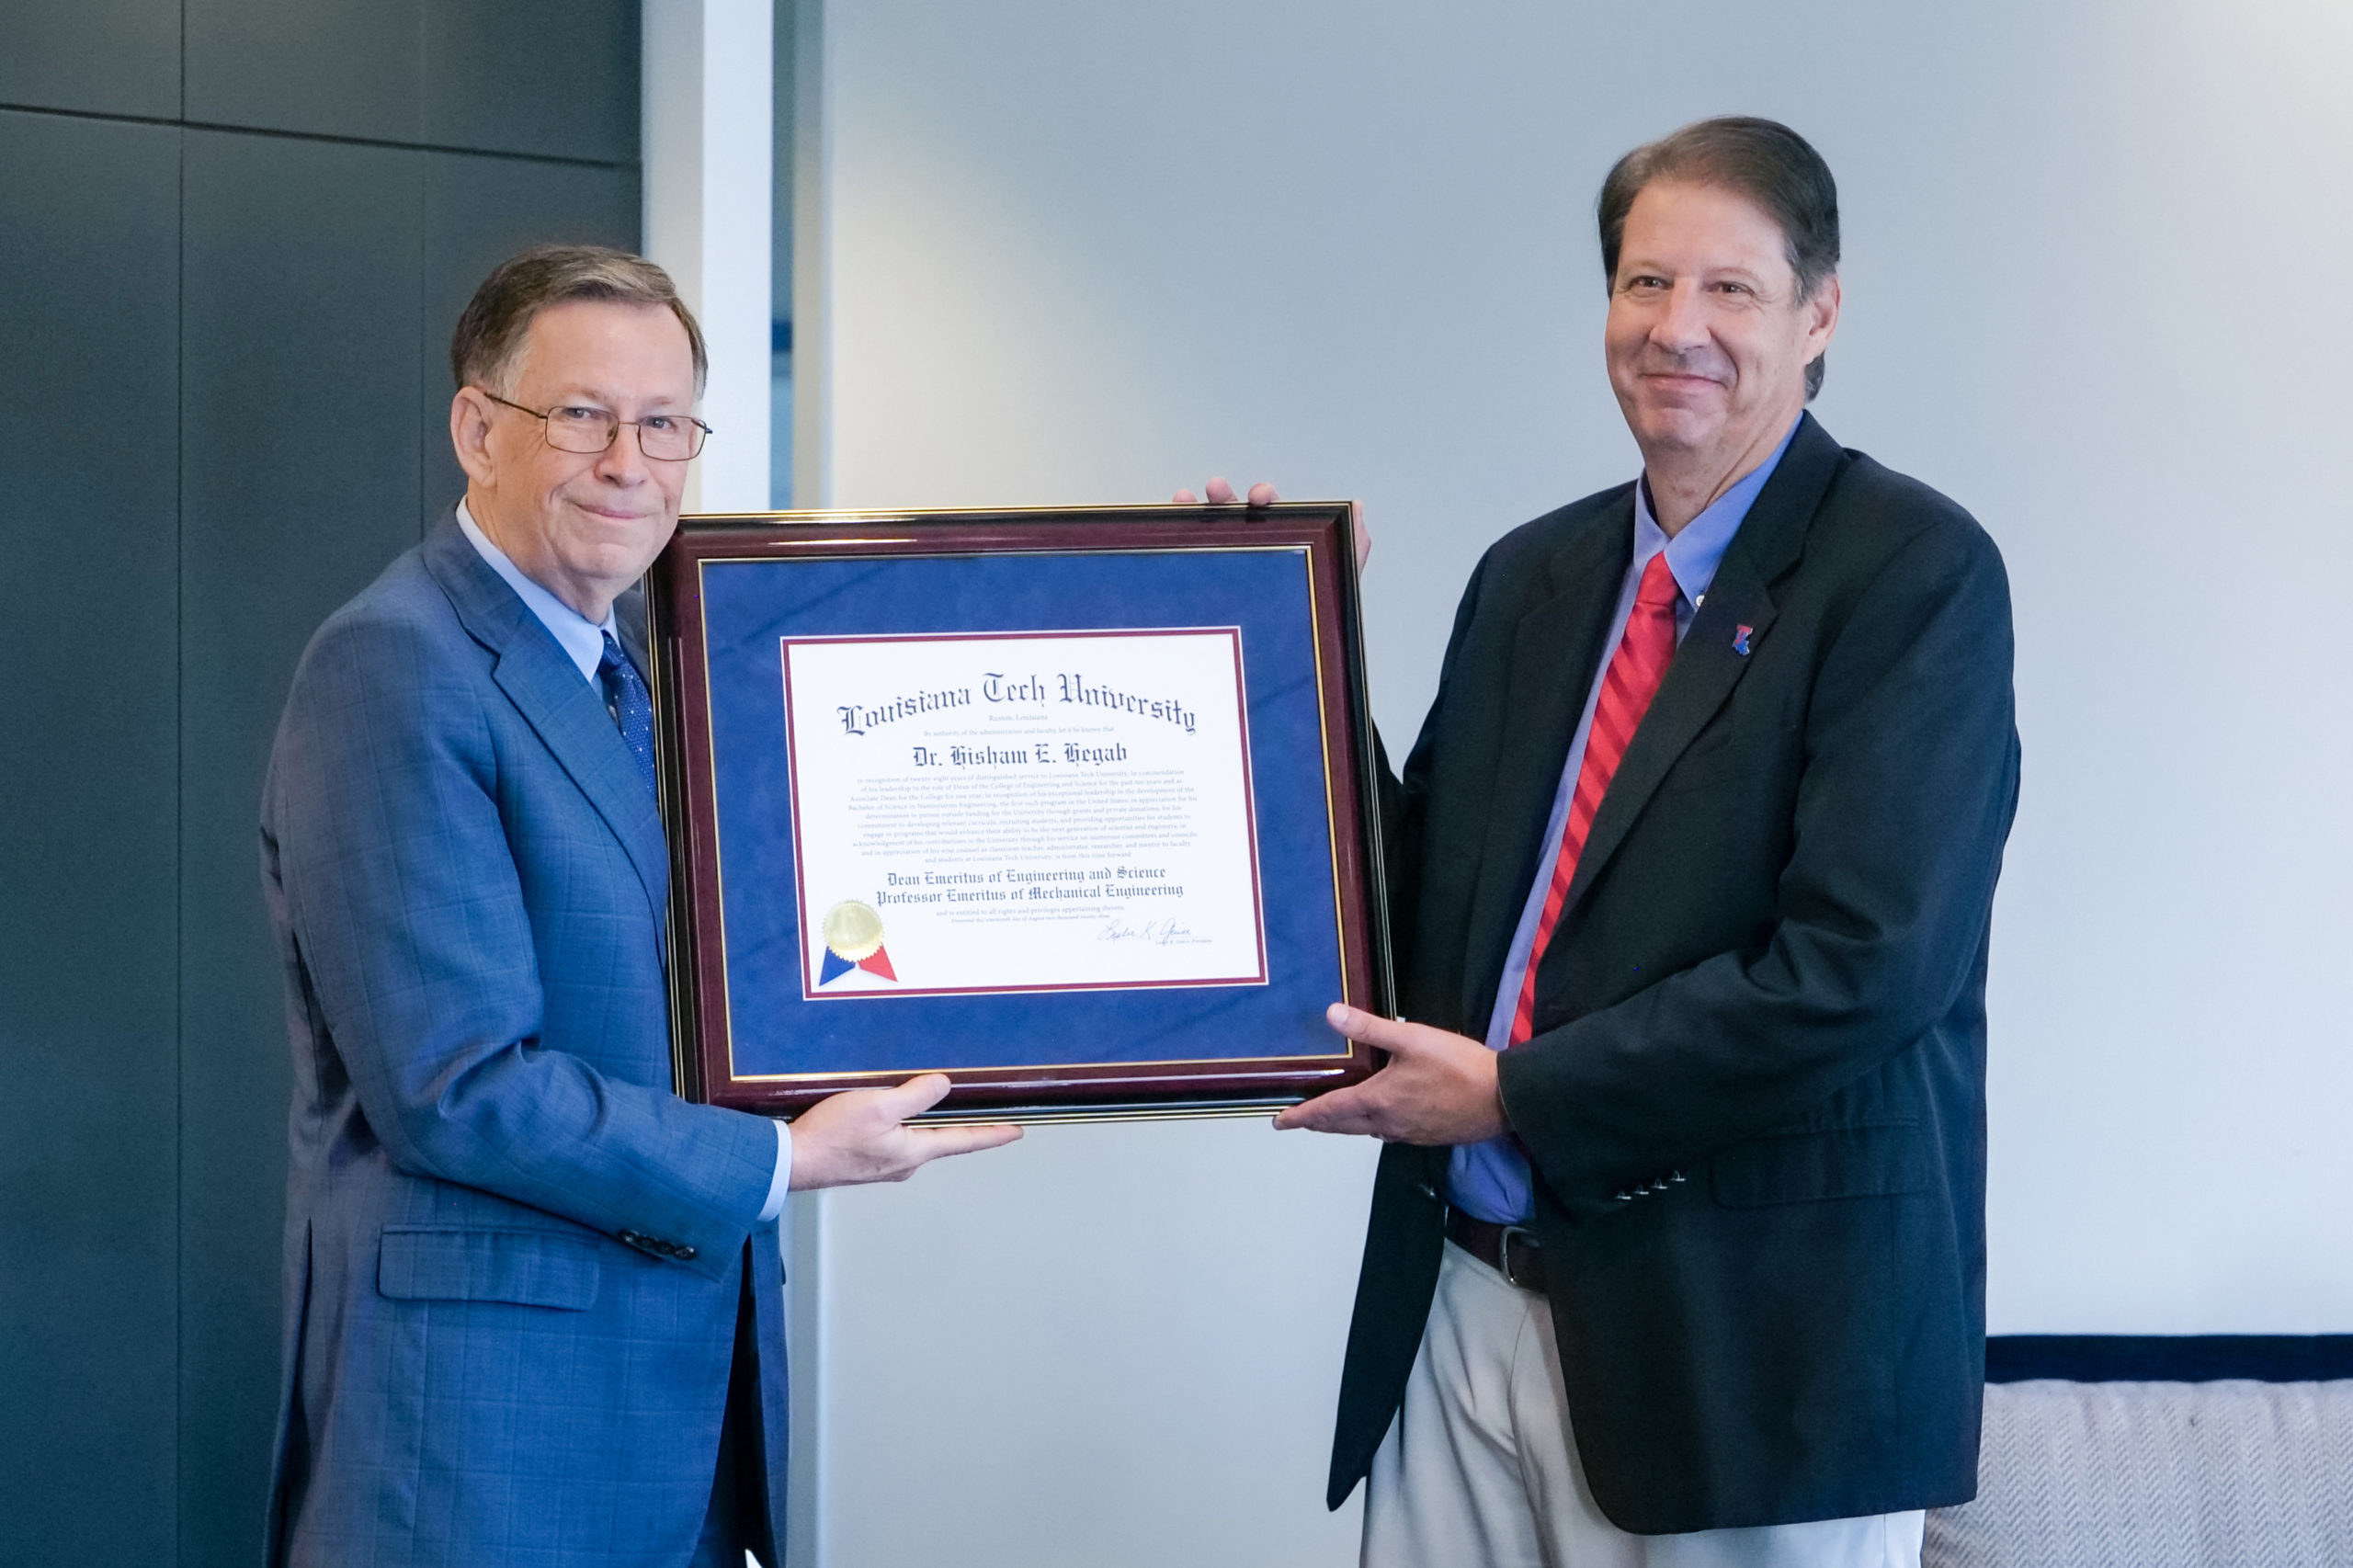 Louisiana Tech President Dr. Les Guice presenting COES Dean Emeritus Dr. Hisham Hegab with a plaque honoring his service to the University